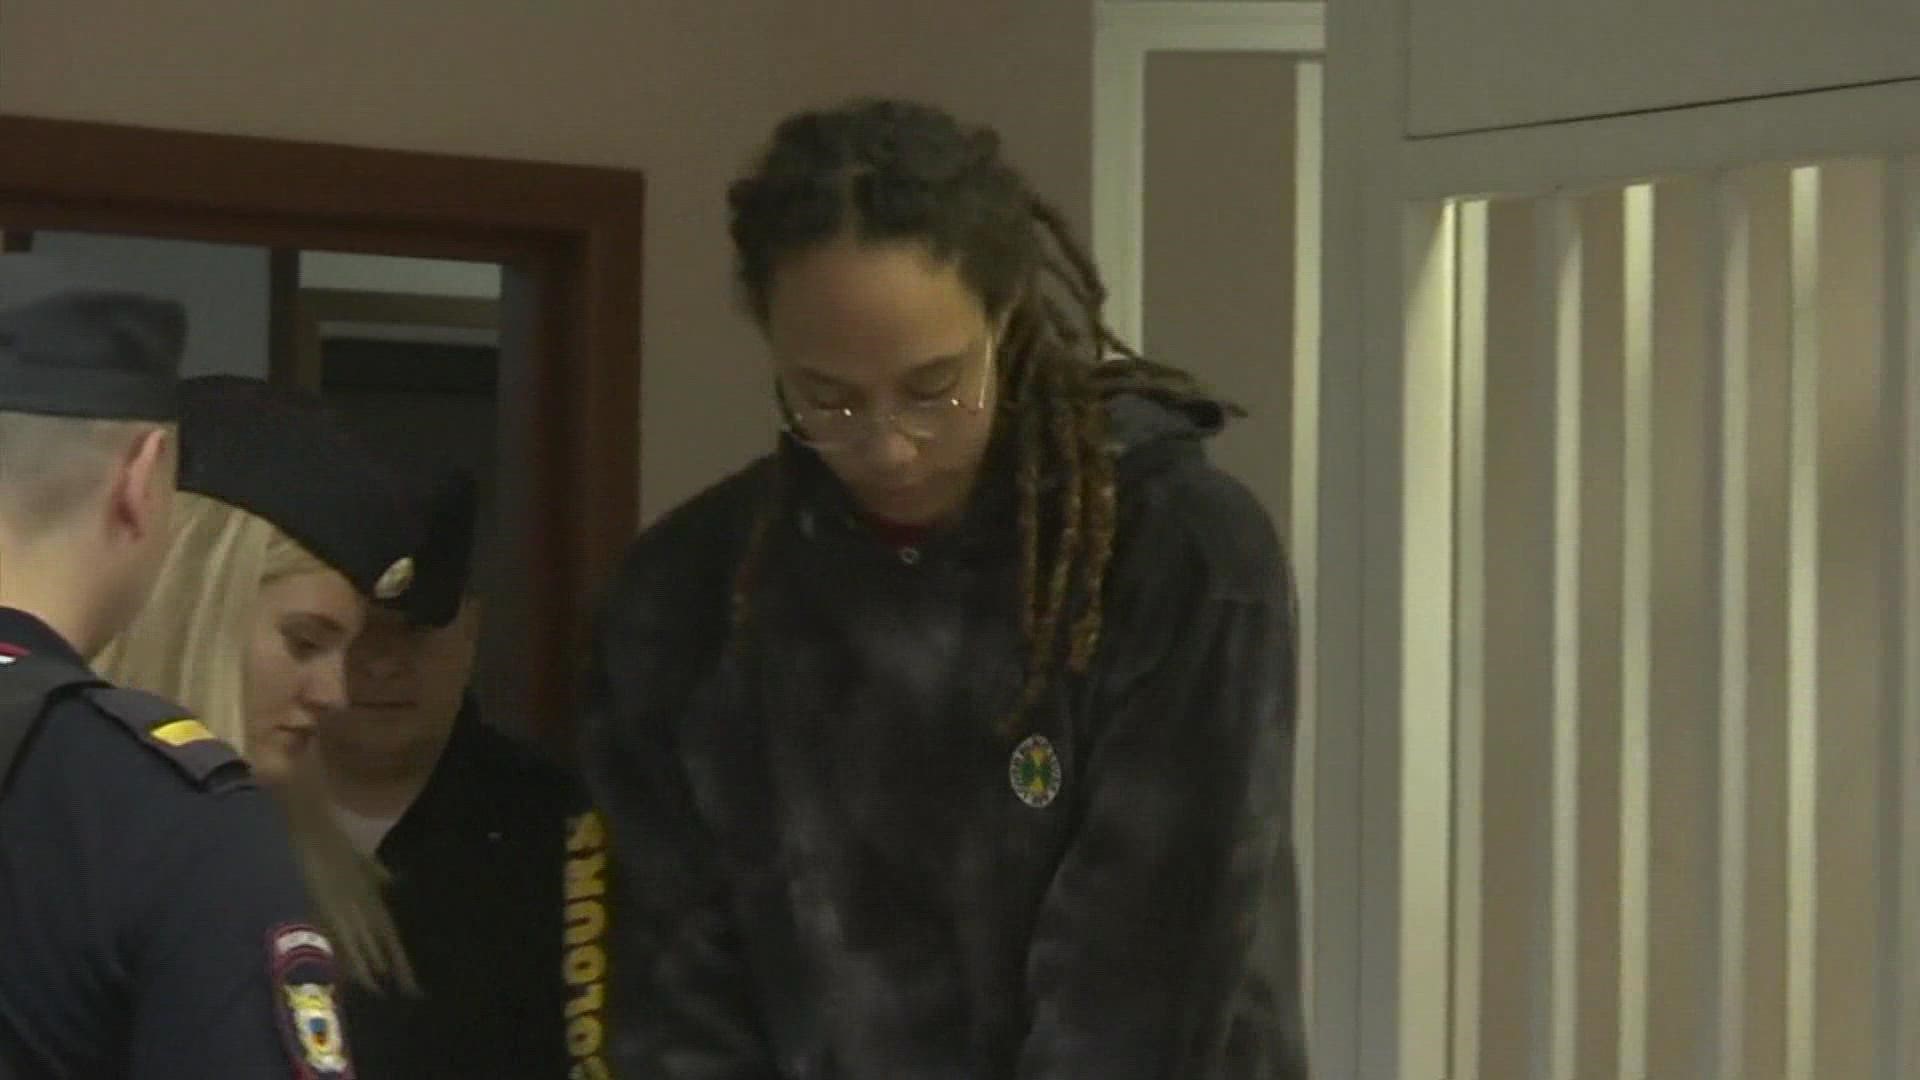 Griner faces up to 10 years in prison.